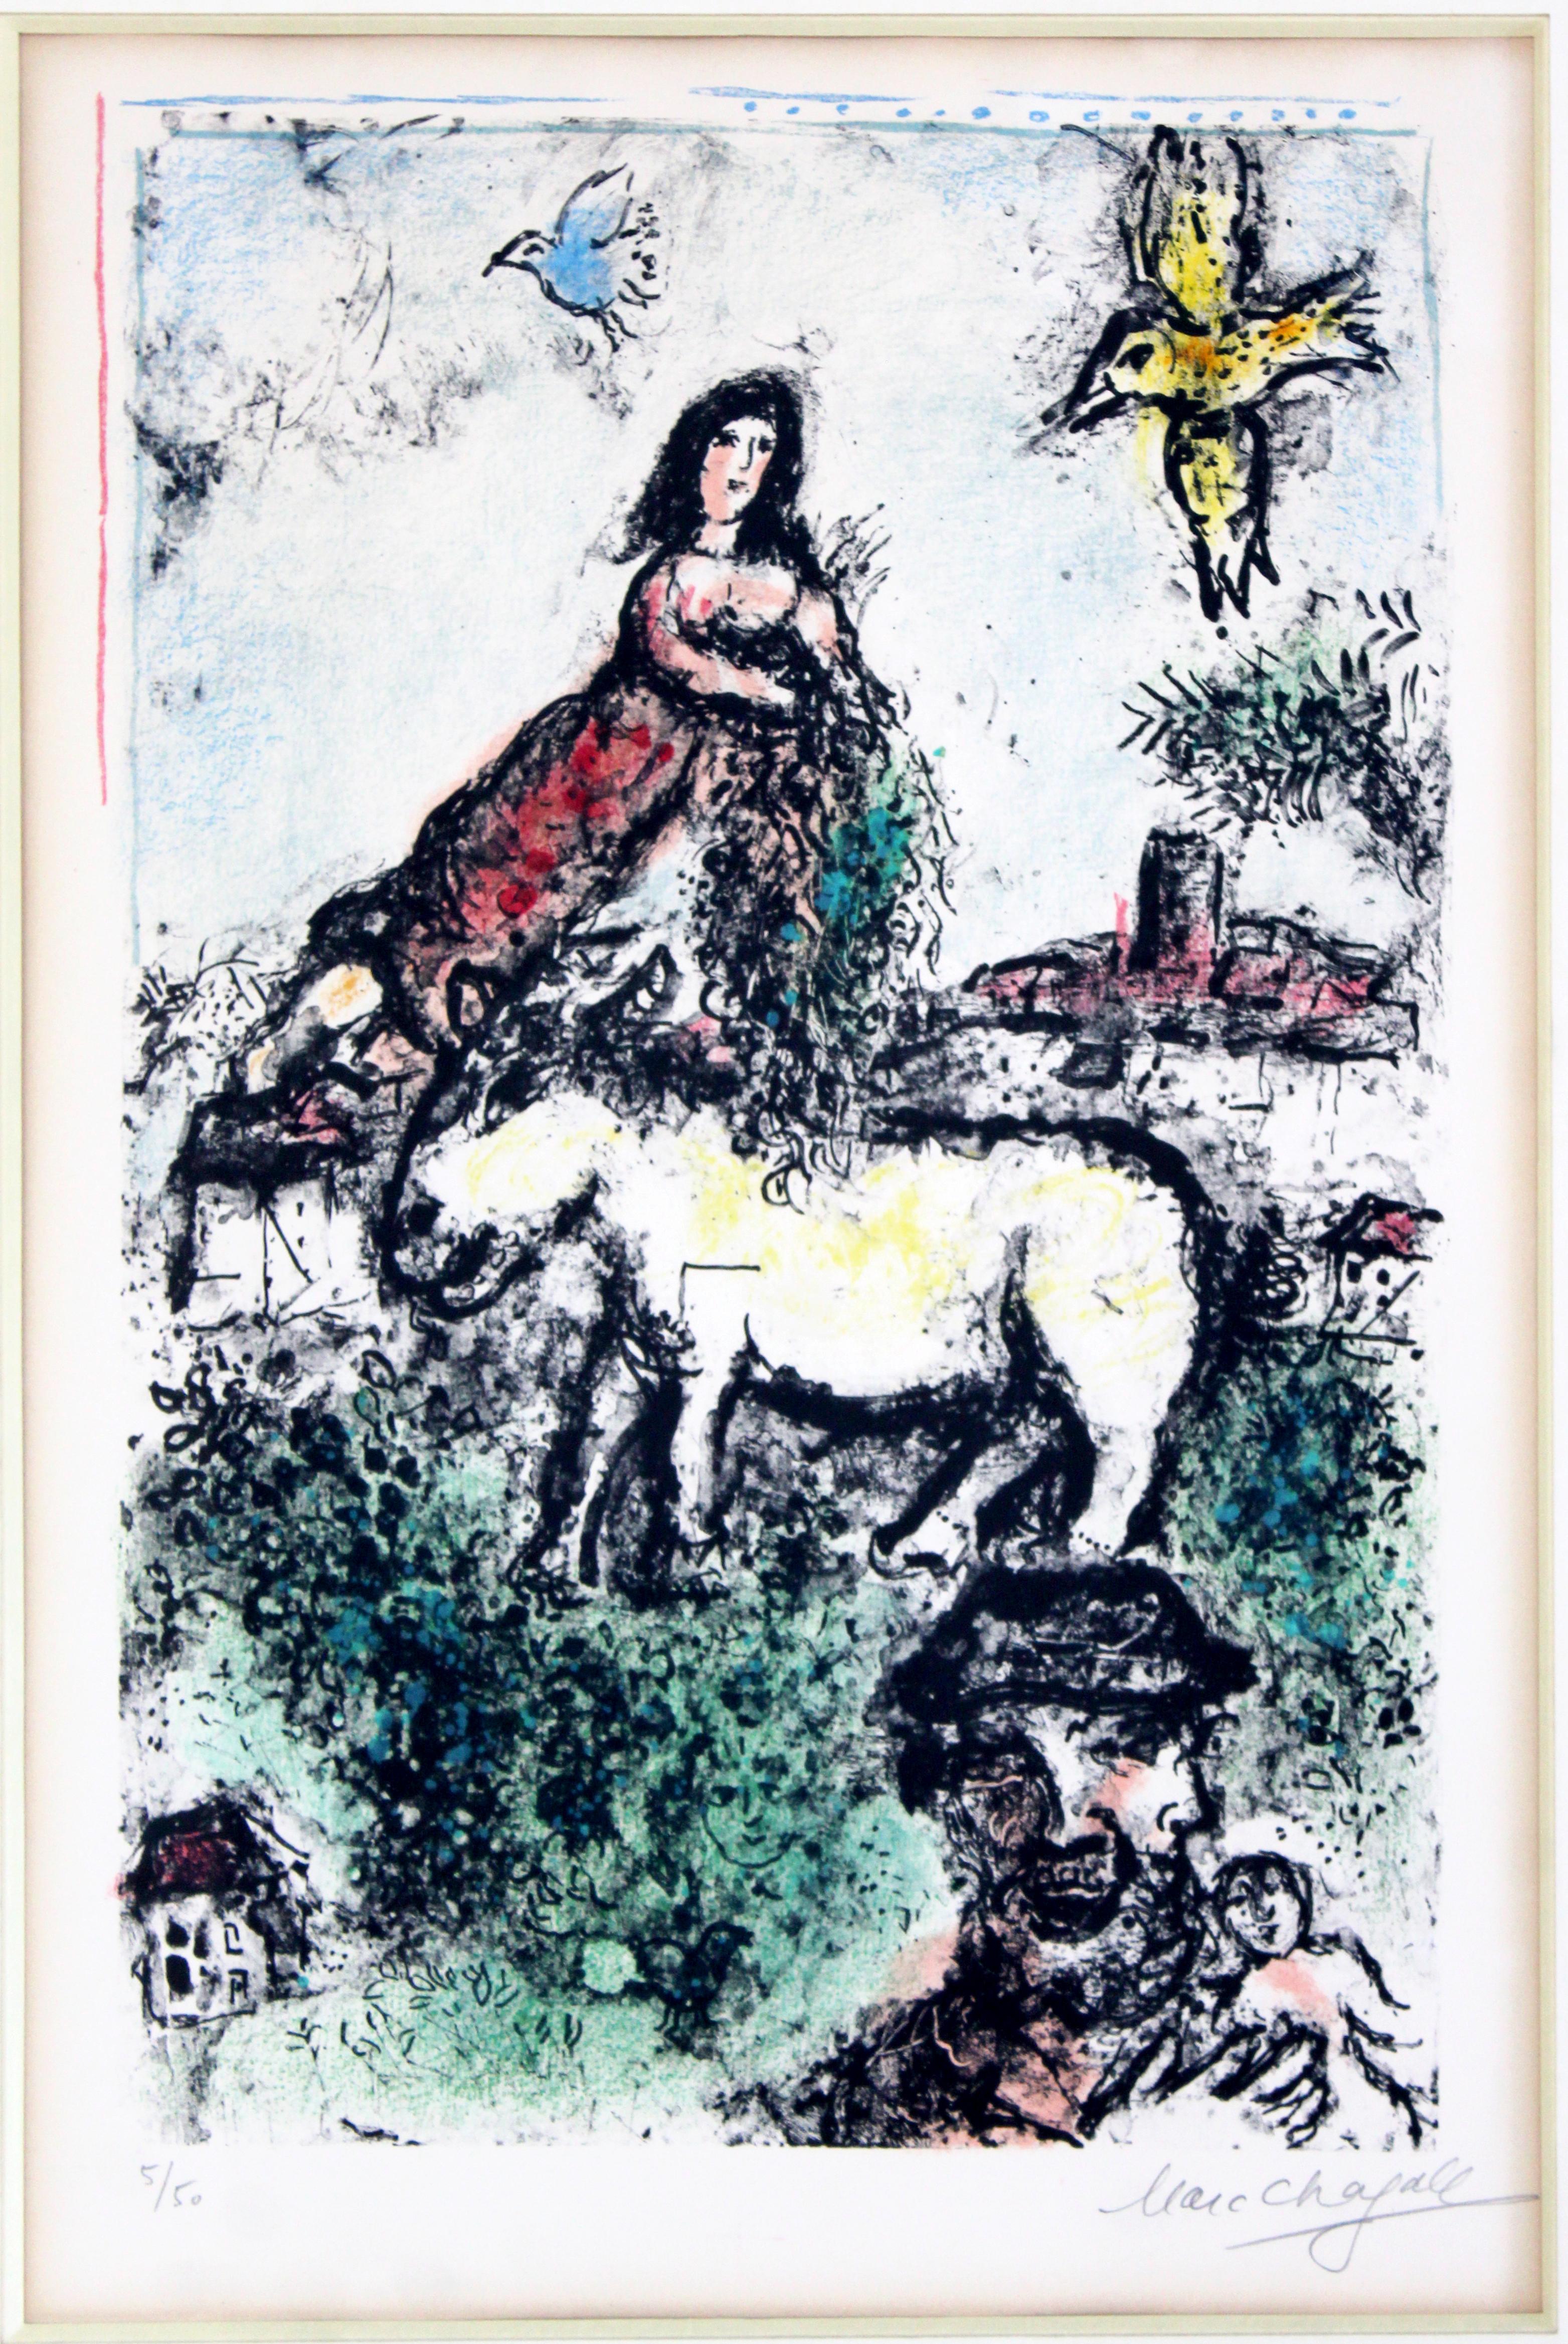 For your consideration is a magnificent, framed Jardin Perdue lithograph, signed by Marc Chagall, numbered 5/50, circa 1969. In excellent condition. The dimensions are 25.5